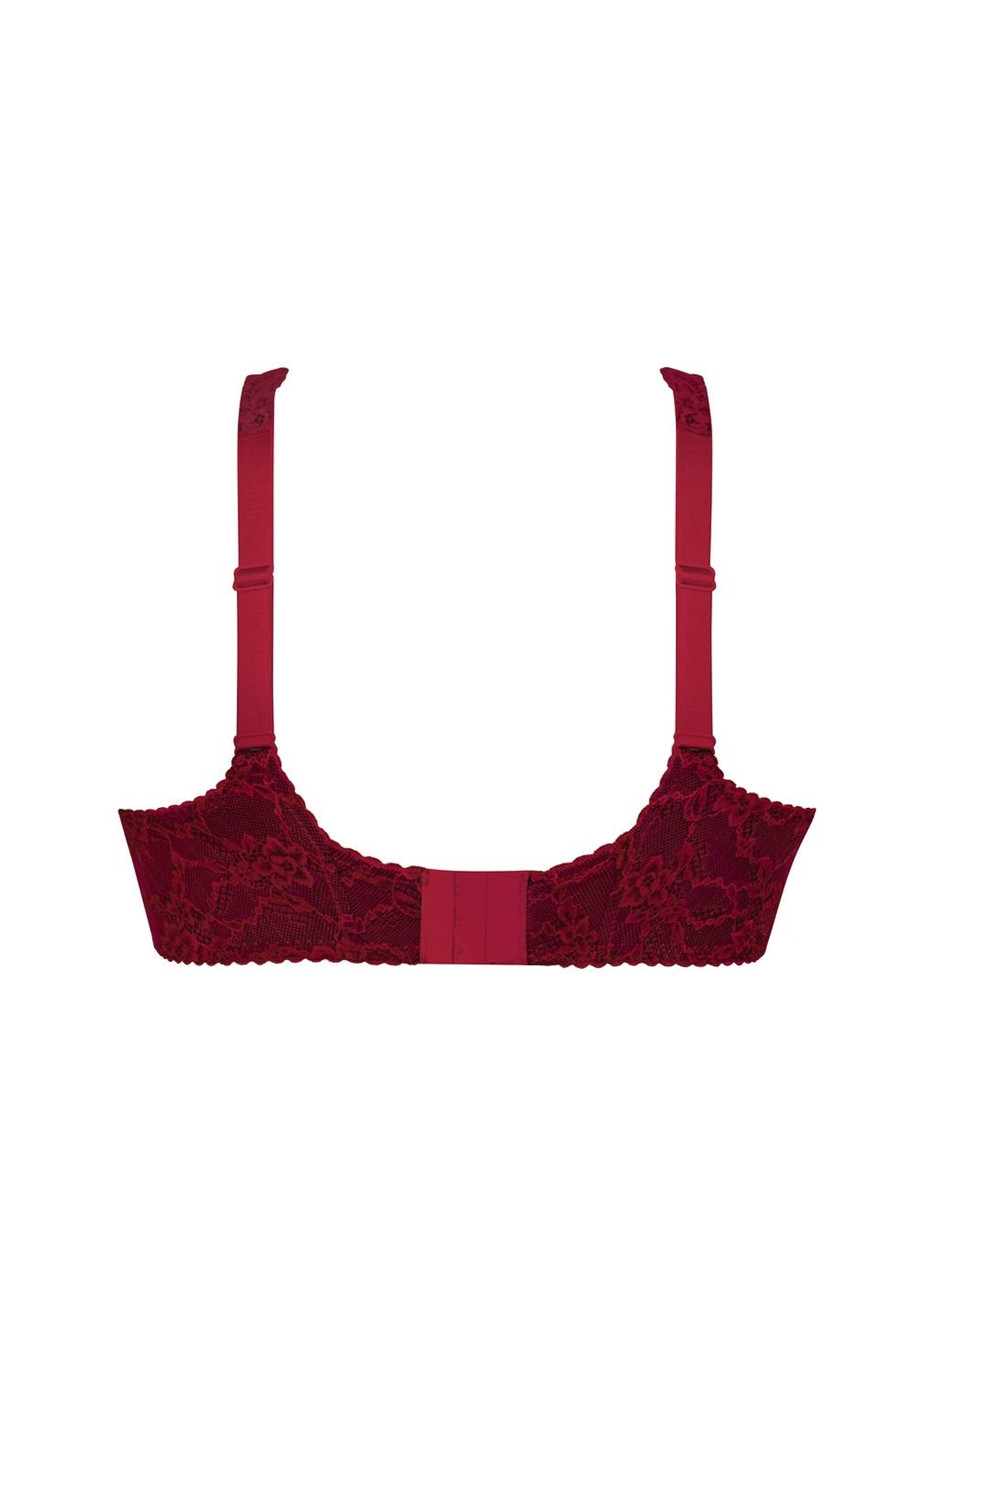 Buy BODYCARE Pack of 2 B-C-D Cup Bra in Maroon Colour - E5583MHMH